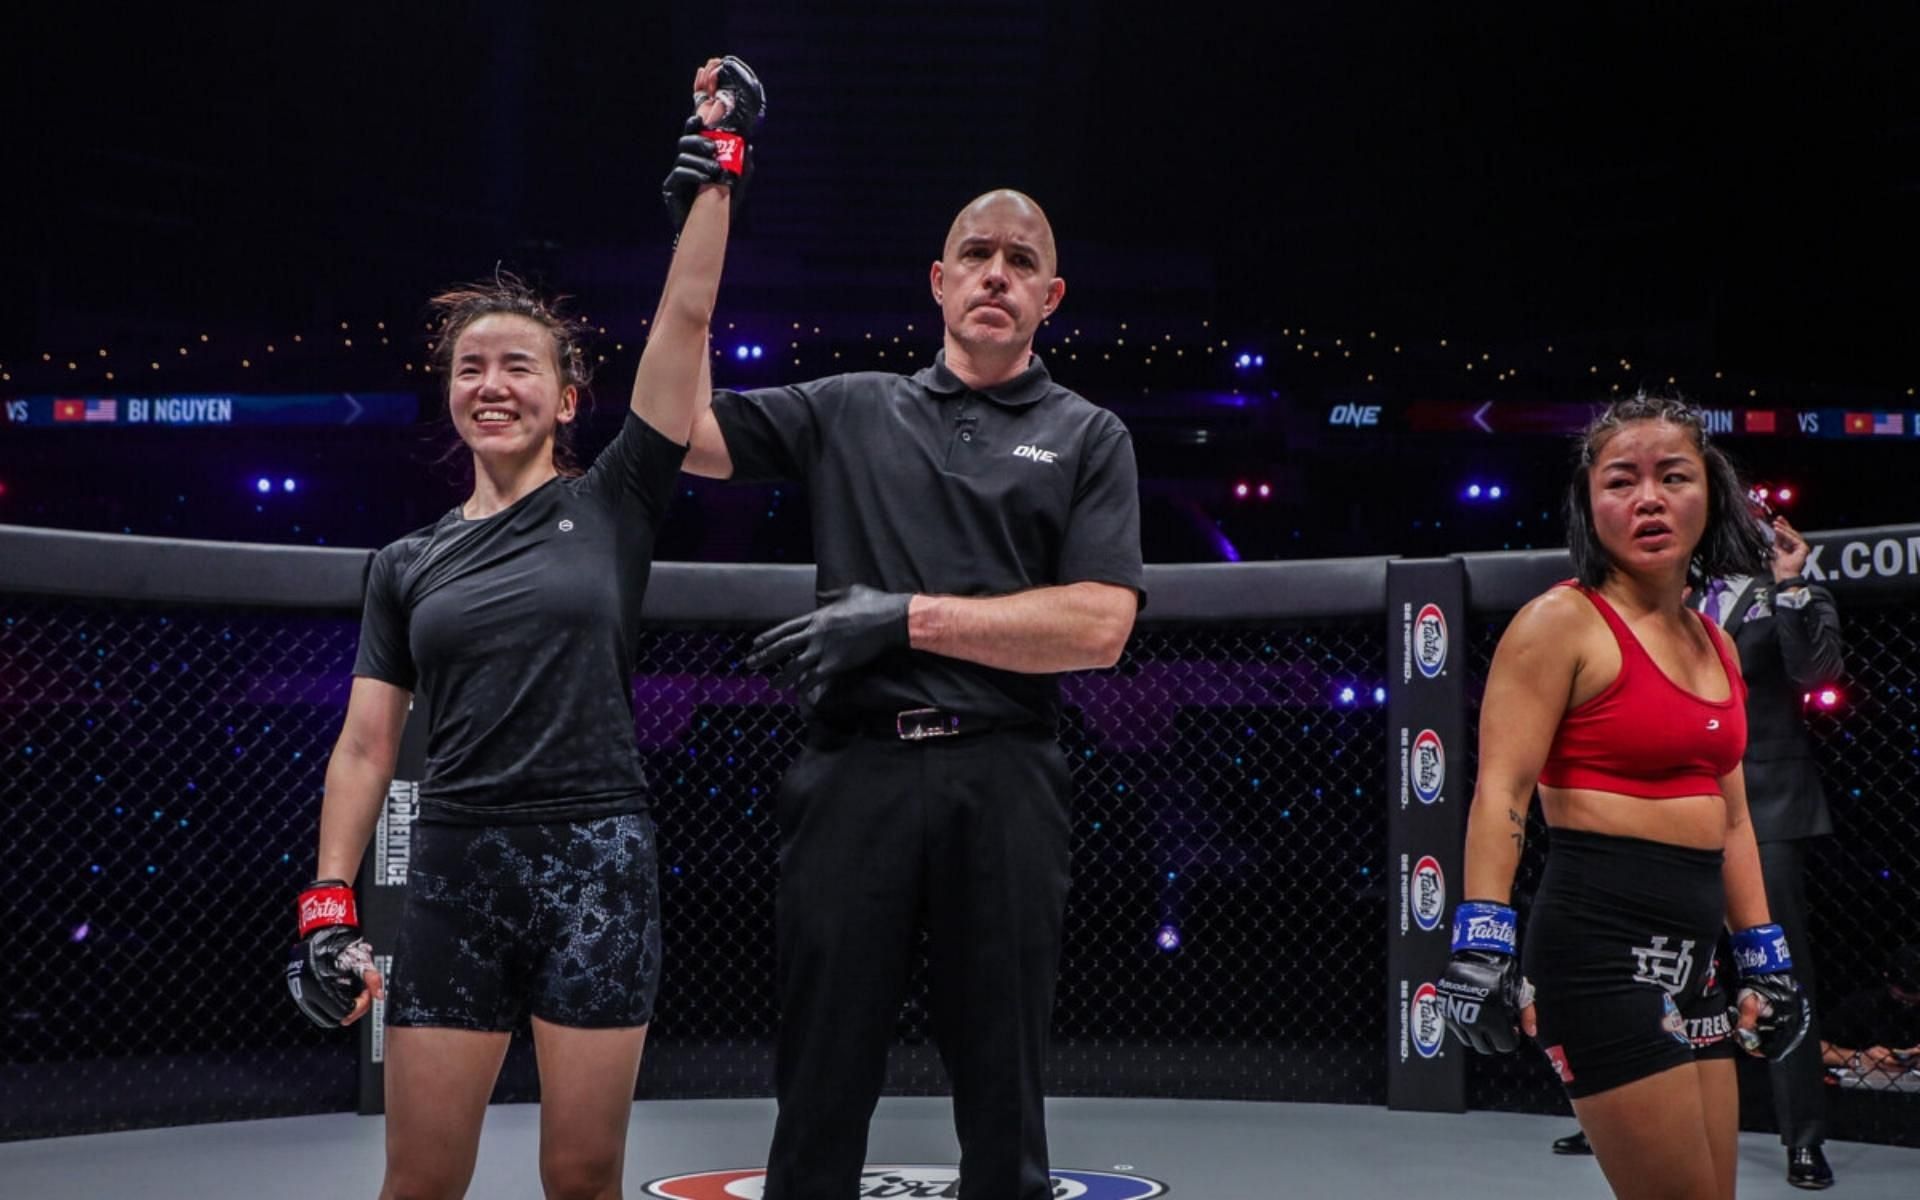 Bi Nguyen (right) lost a unanimous decision to Lin Heqin (right) at ONE Championship: Bad Blood. (Image courtesy of ONE Championship)